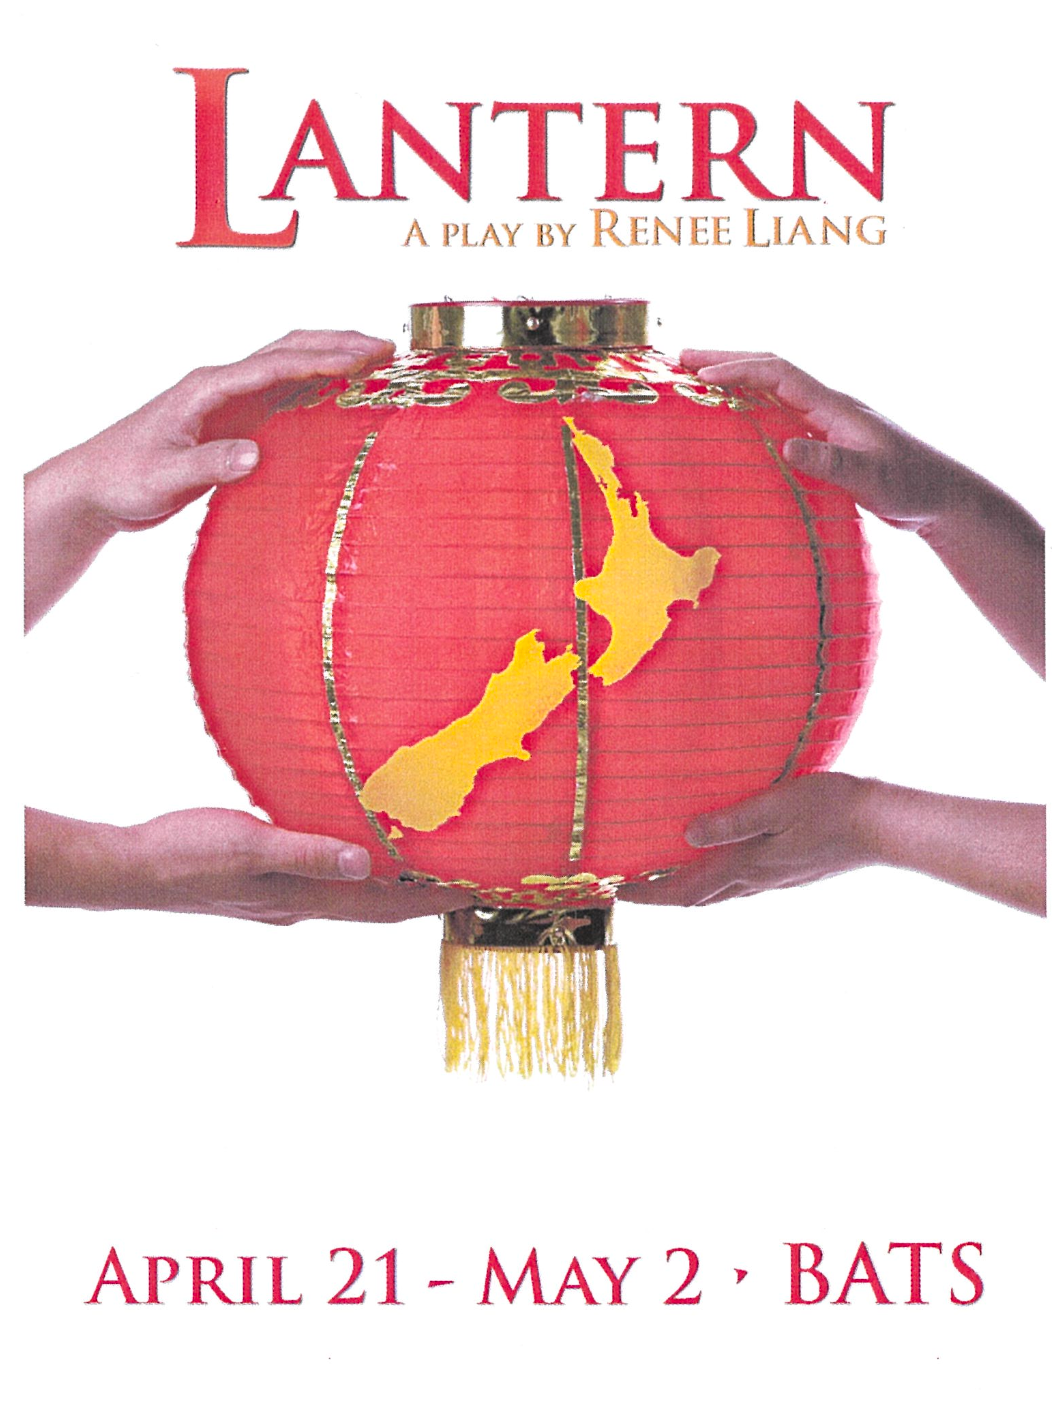 Two hands holding a red chinese lantern with a map of New Zealand painted on it in yellow